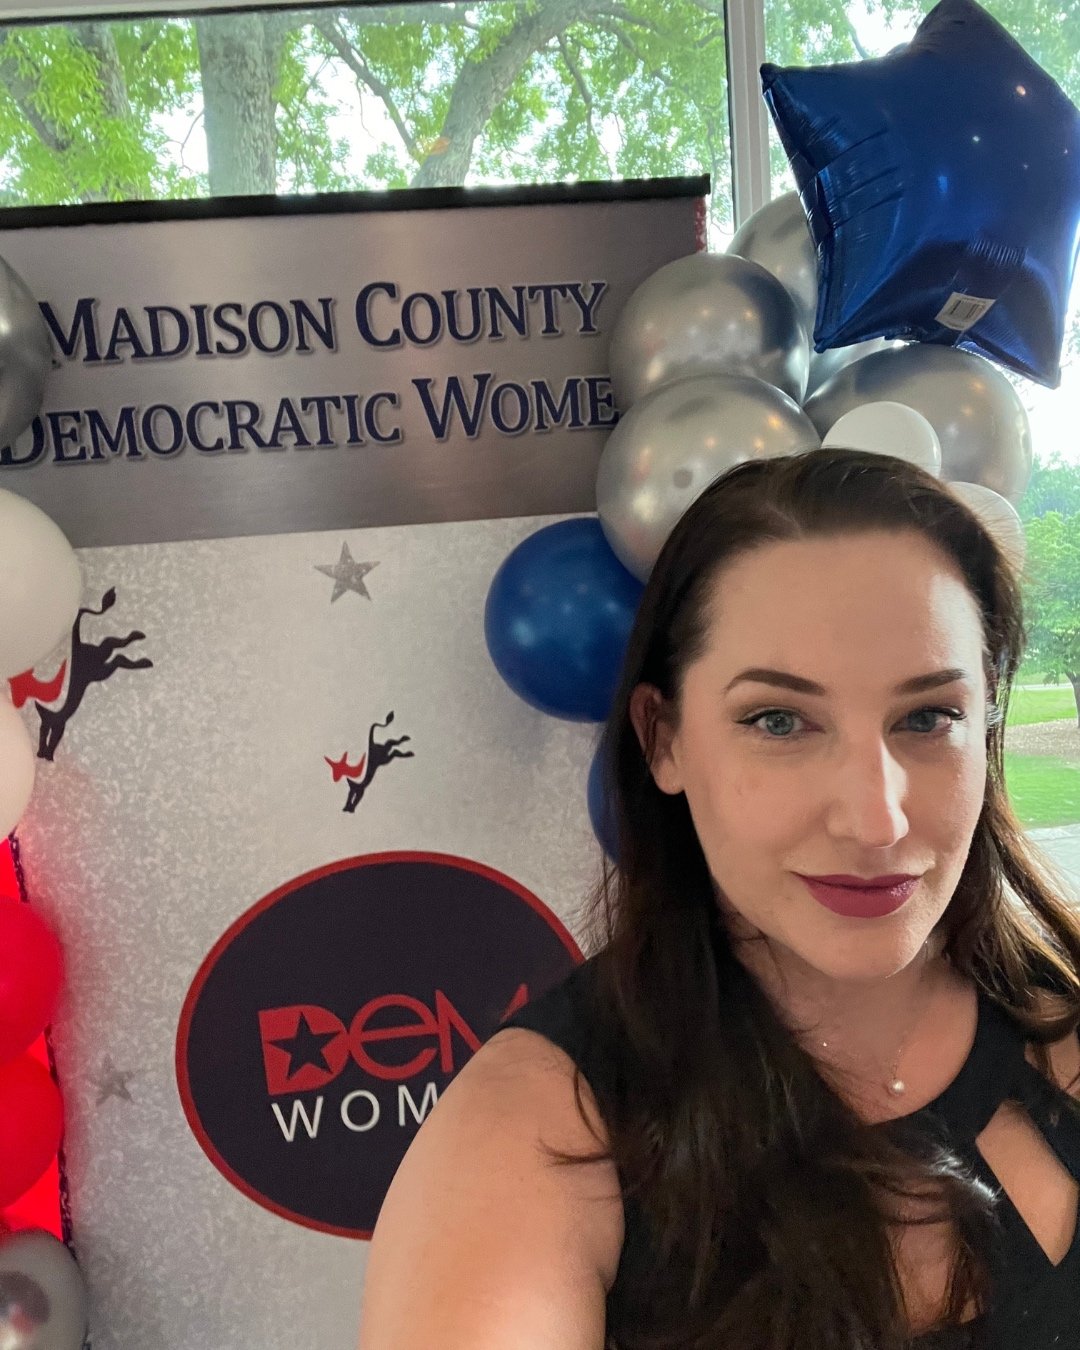 Wonderful Night at the Madison County Democratic Women's JFK Scholarship dinner last night! 

They picked two amazing young women to receive scholarships who had resumes that already impress!

#Democrats #JFK